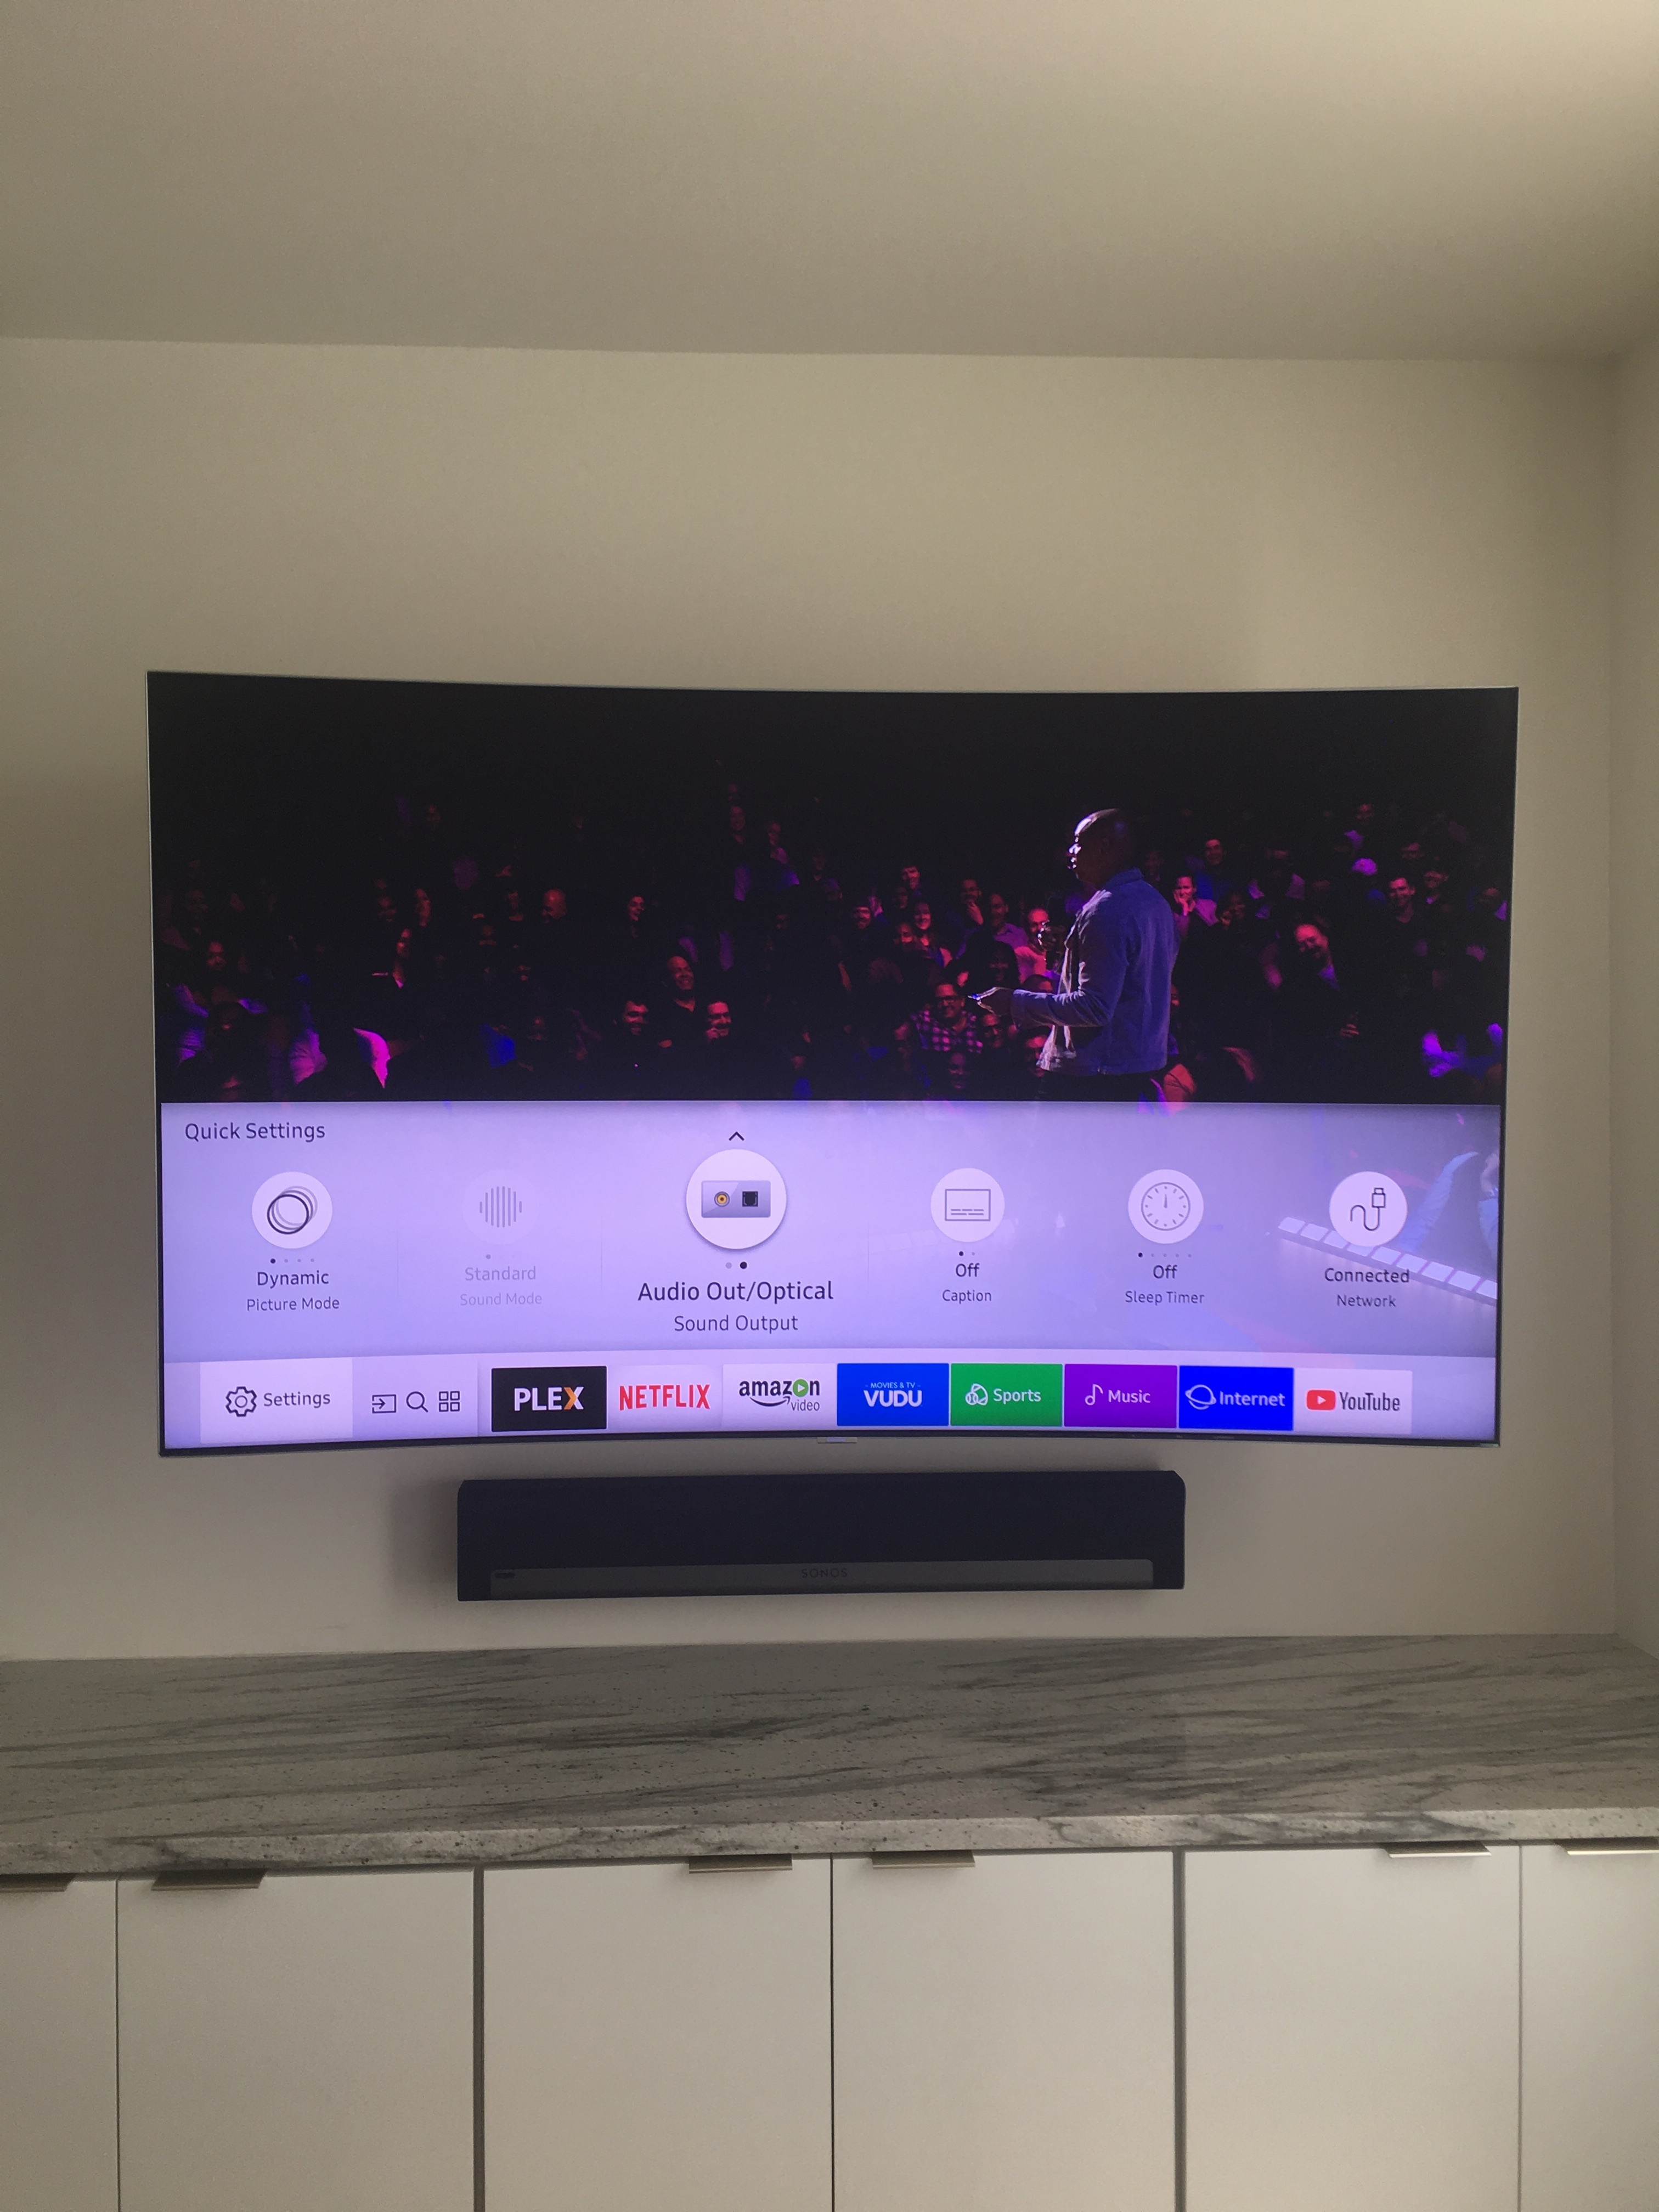 Sound And Picture Out Of Sync On Samsung Tv Samsung Q8C / Sonos Soundbar with Samsung TV Smart Remote | Sonos Community